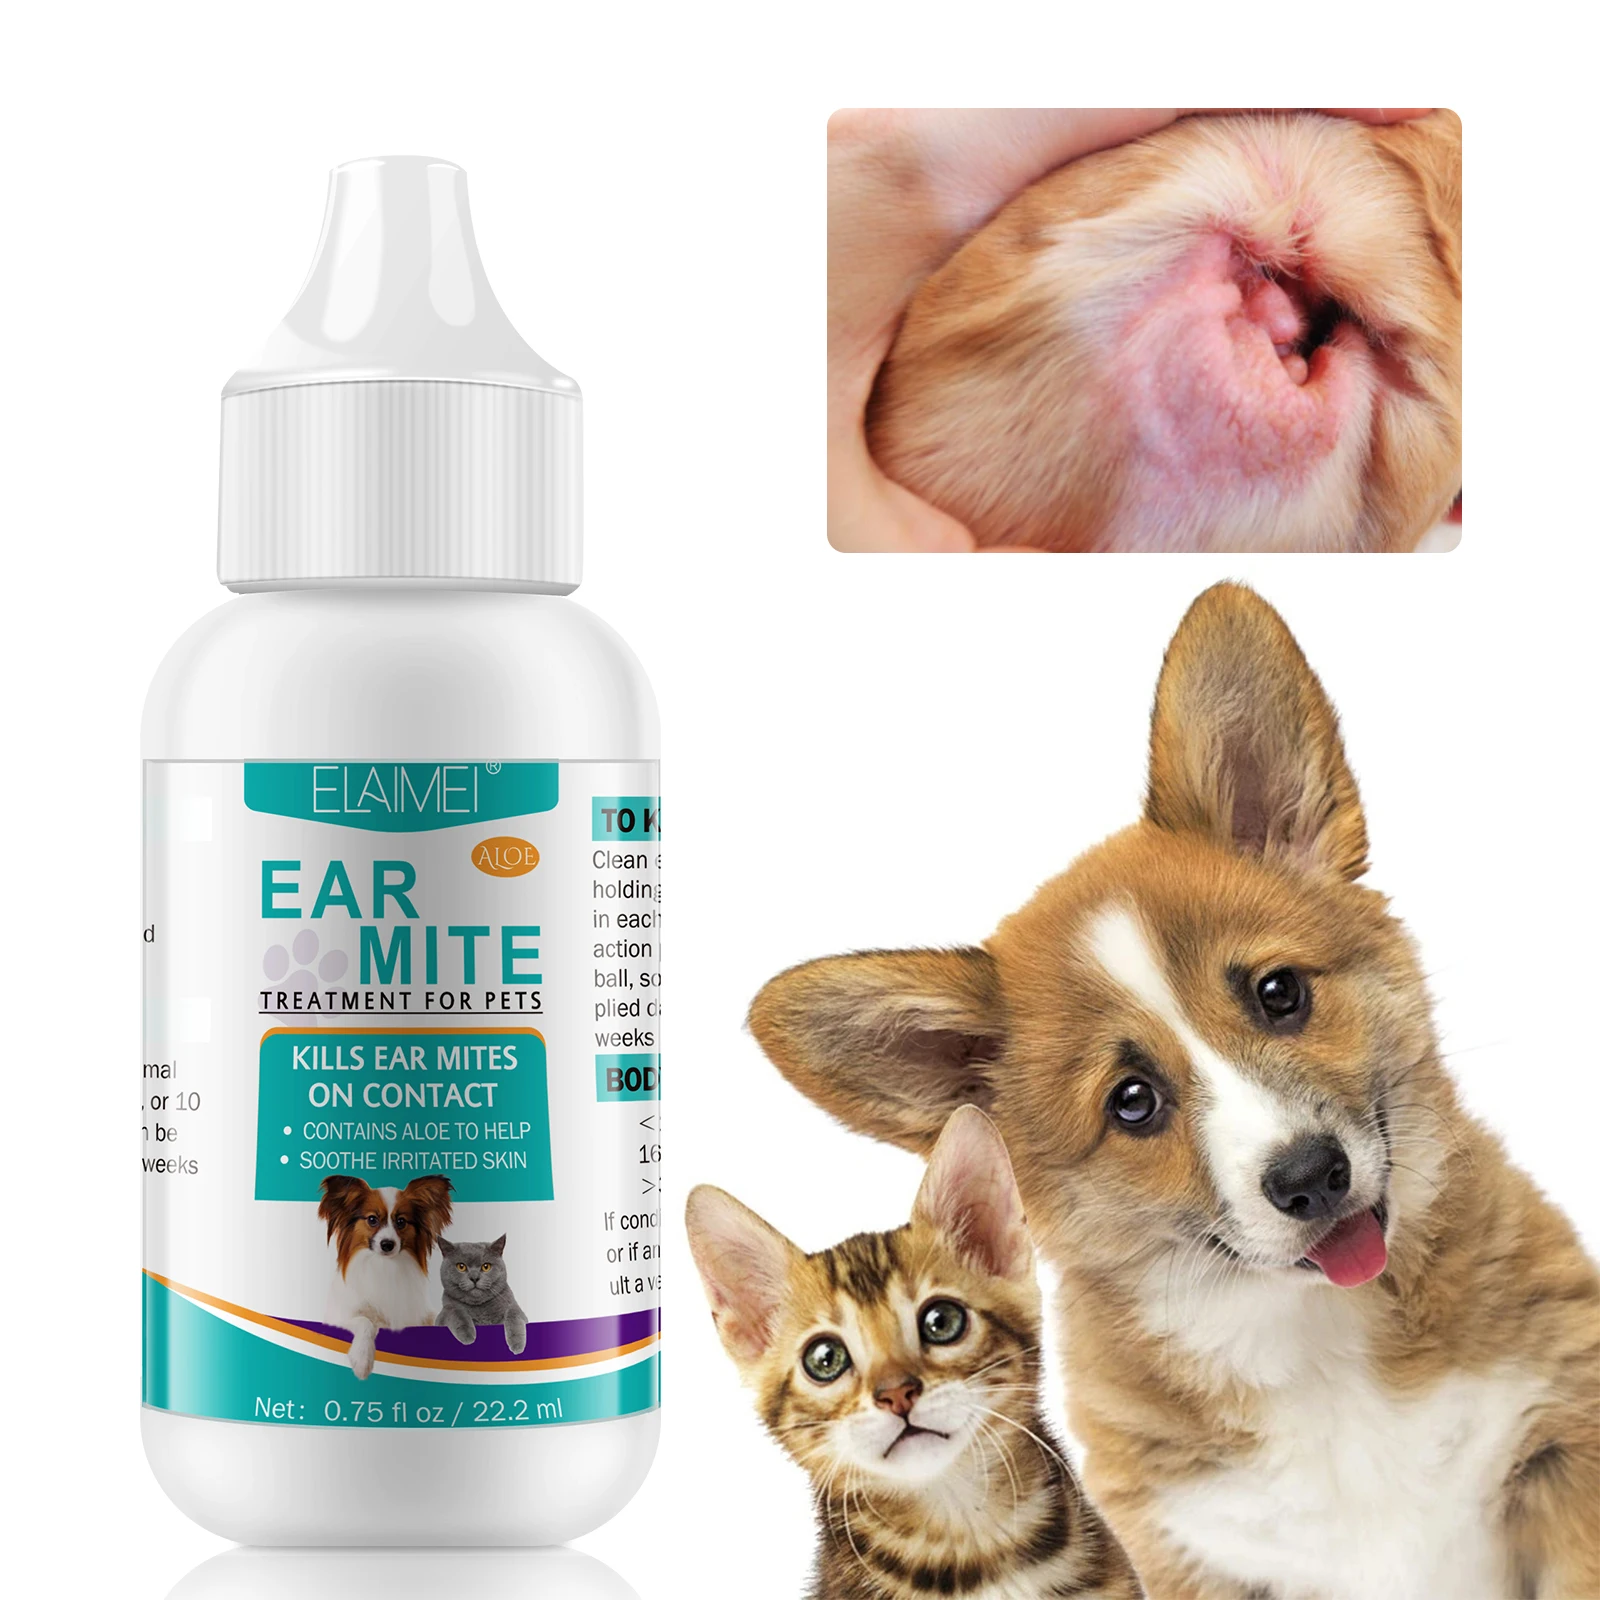 

ELAIMEI reducing itching redness odor mites yeast fungal infections treatment cat dog pet ear cleanerpet ear mite oil